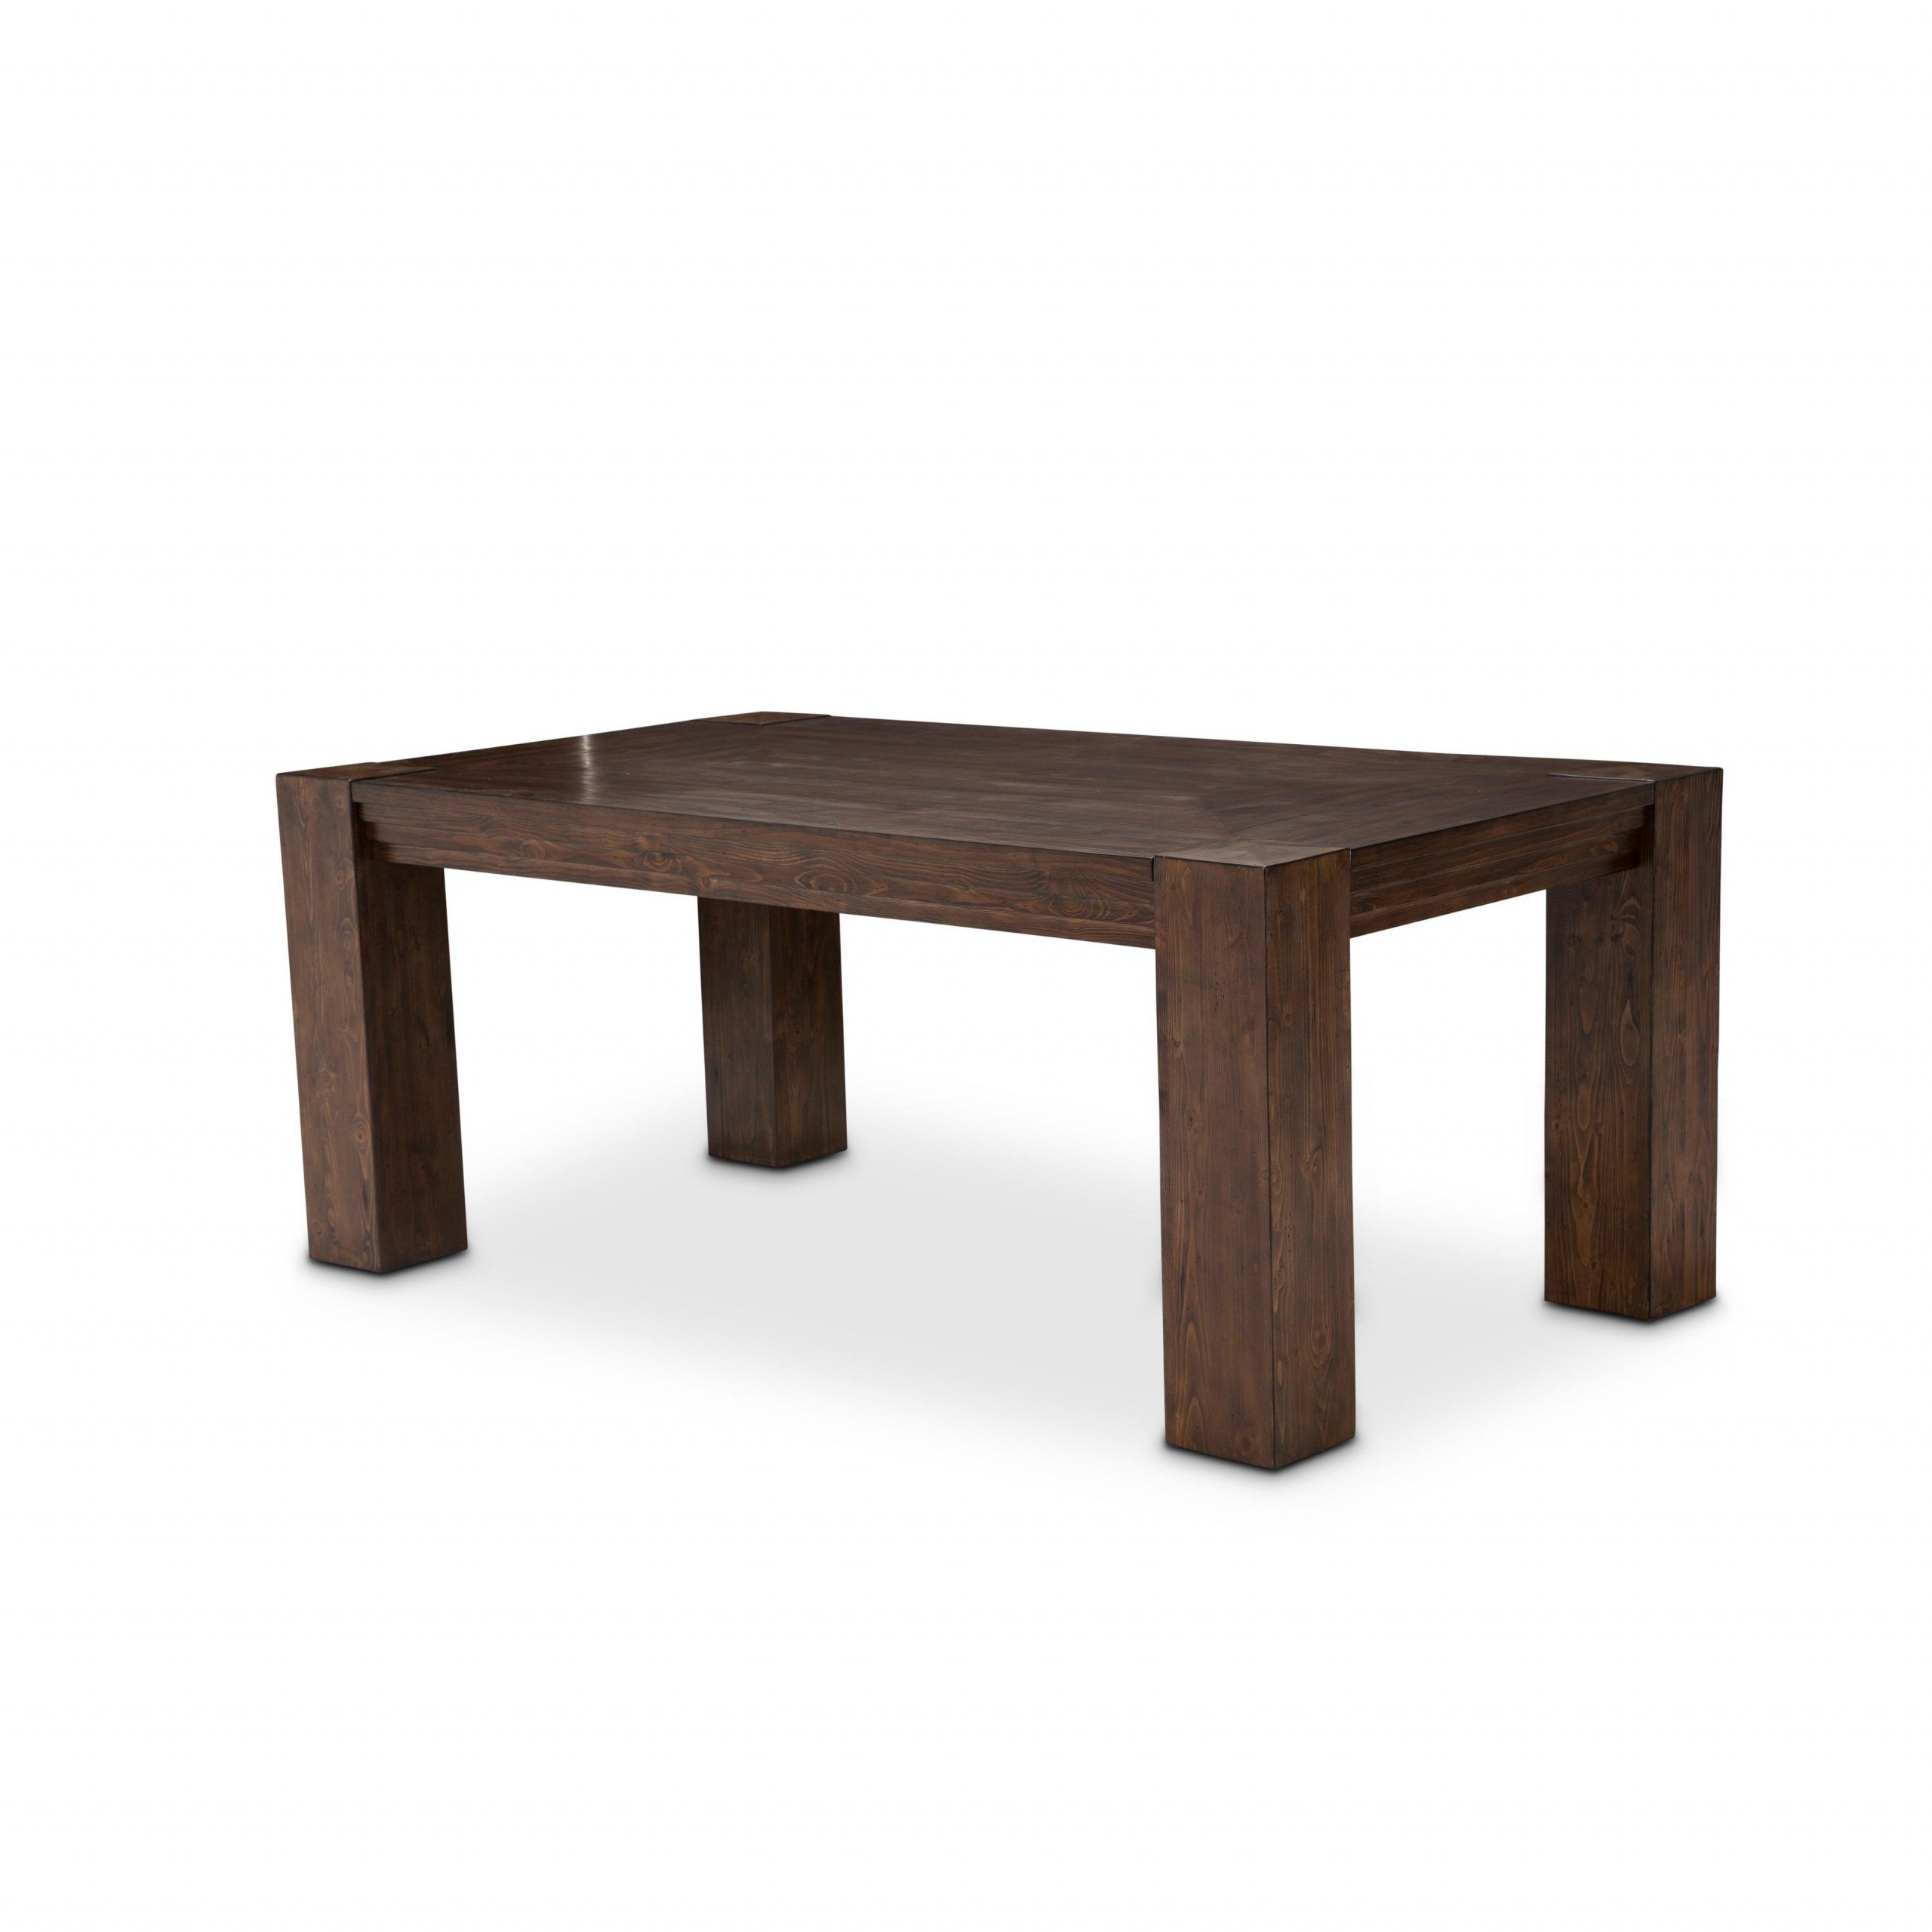 Buy Michael Amini Kitchen & Dining Room Tables Online At Within Most Current Menlo Reclaimed Wood Extending Dining Tables (View 8 of 25)